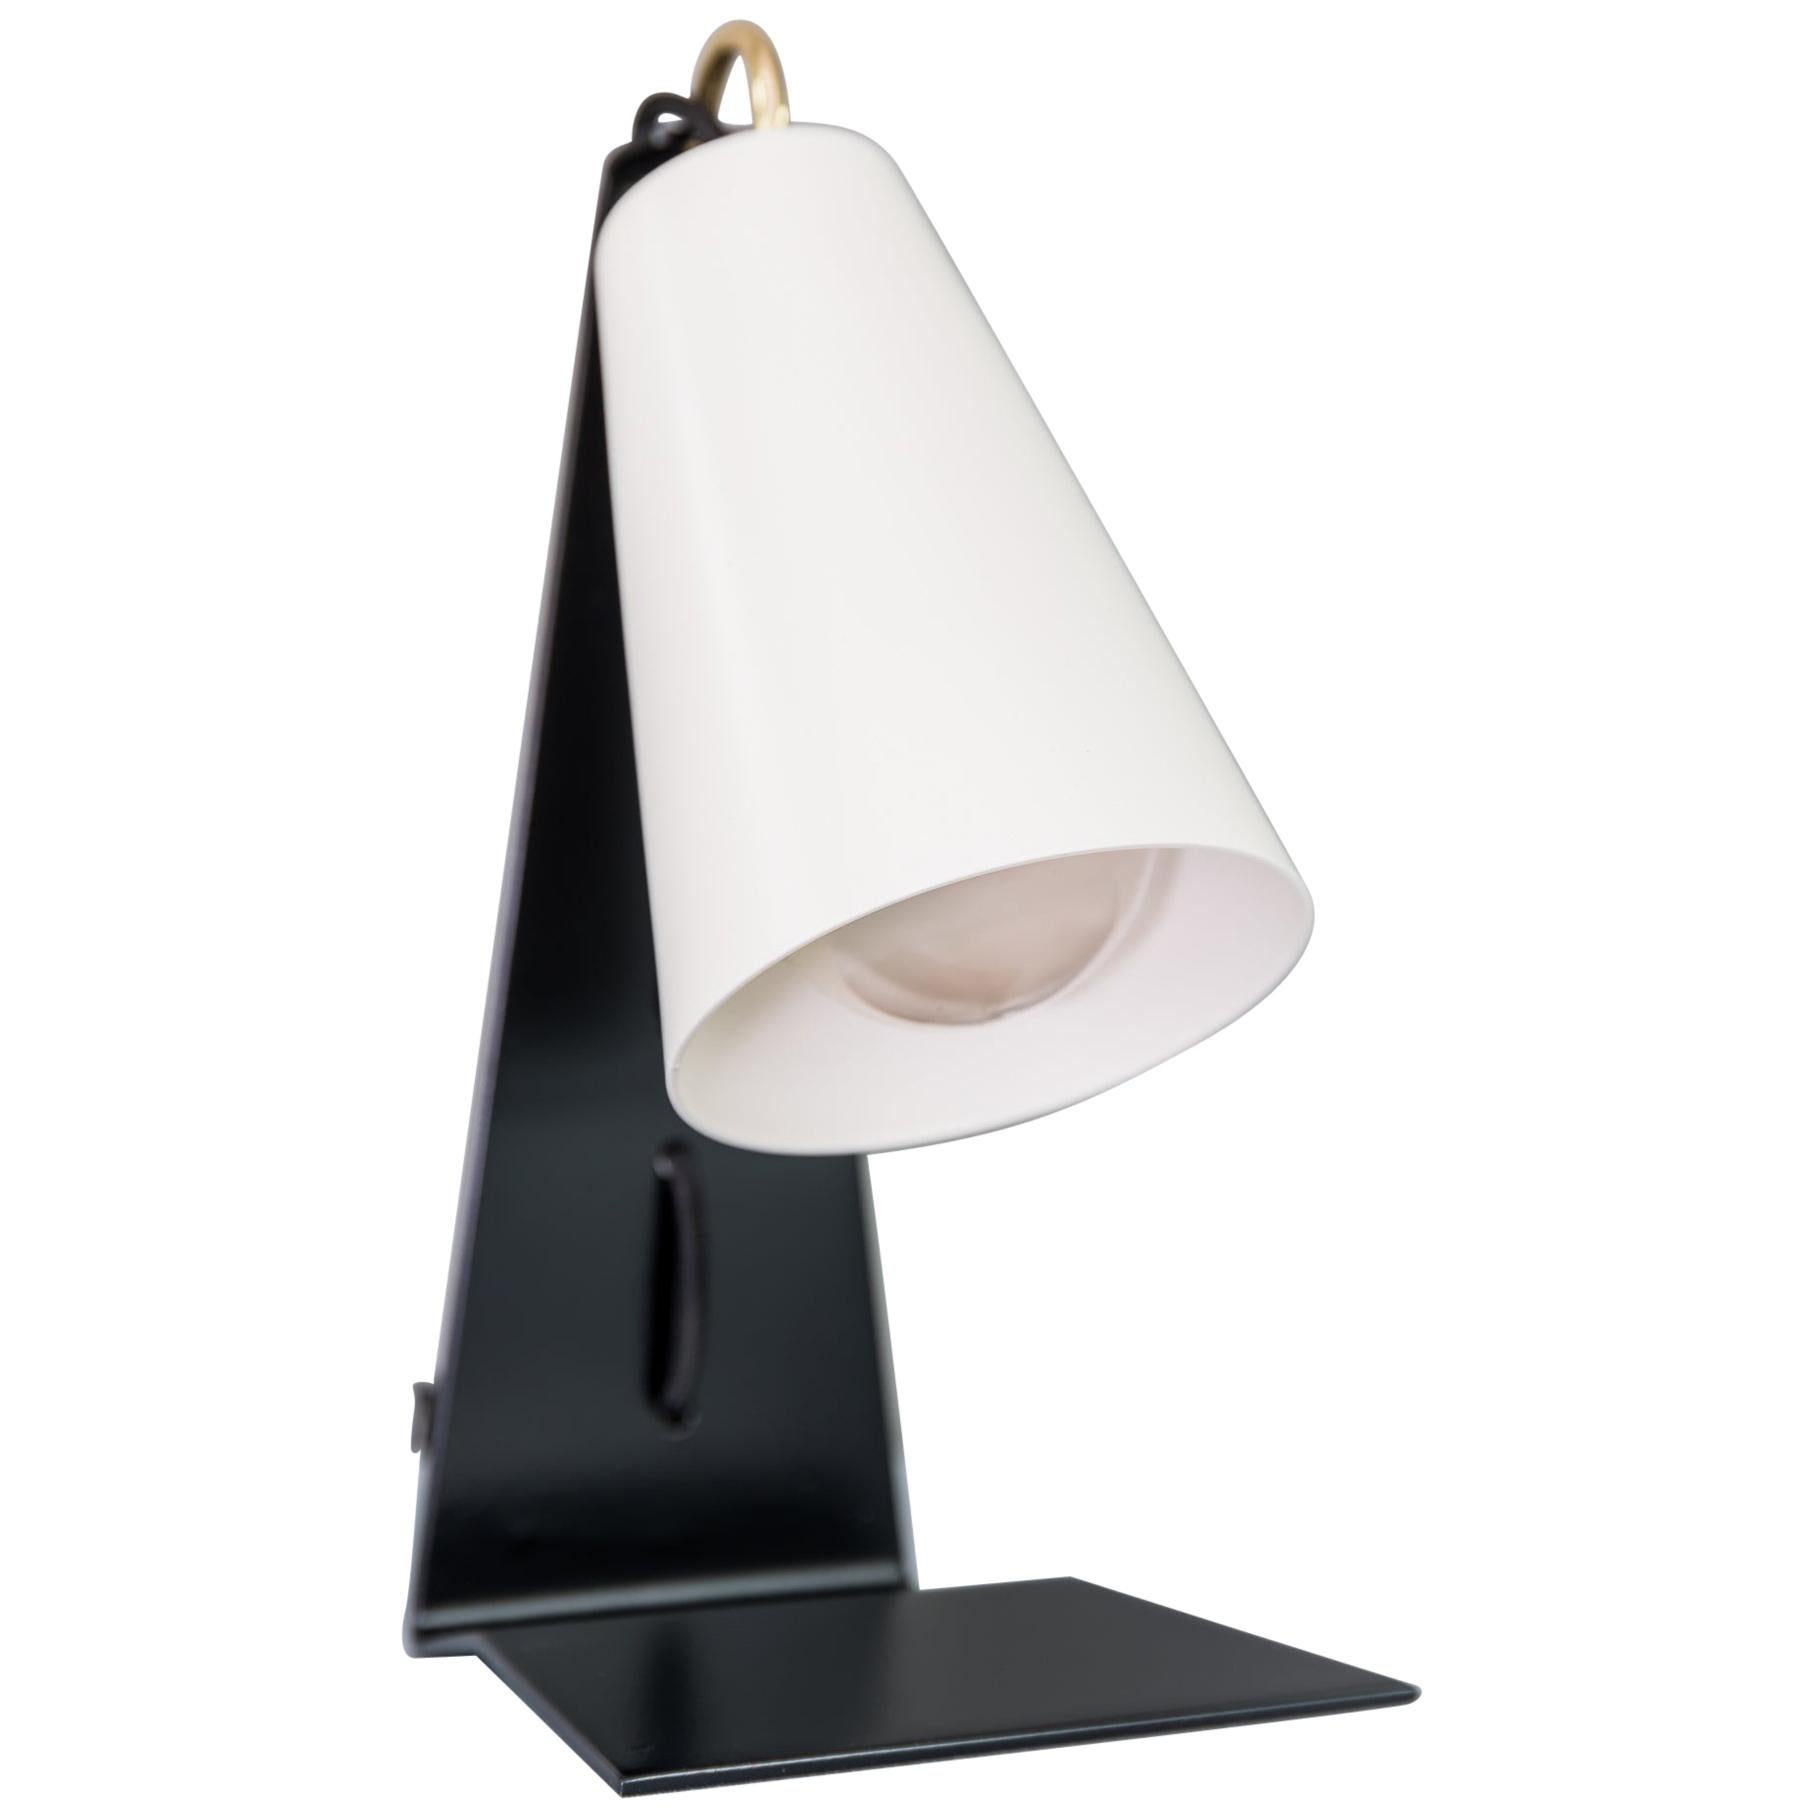 Black and White Austrian Modernist Metall Table Lamp Hook by J. T. Kalmar 1960s For Sale